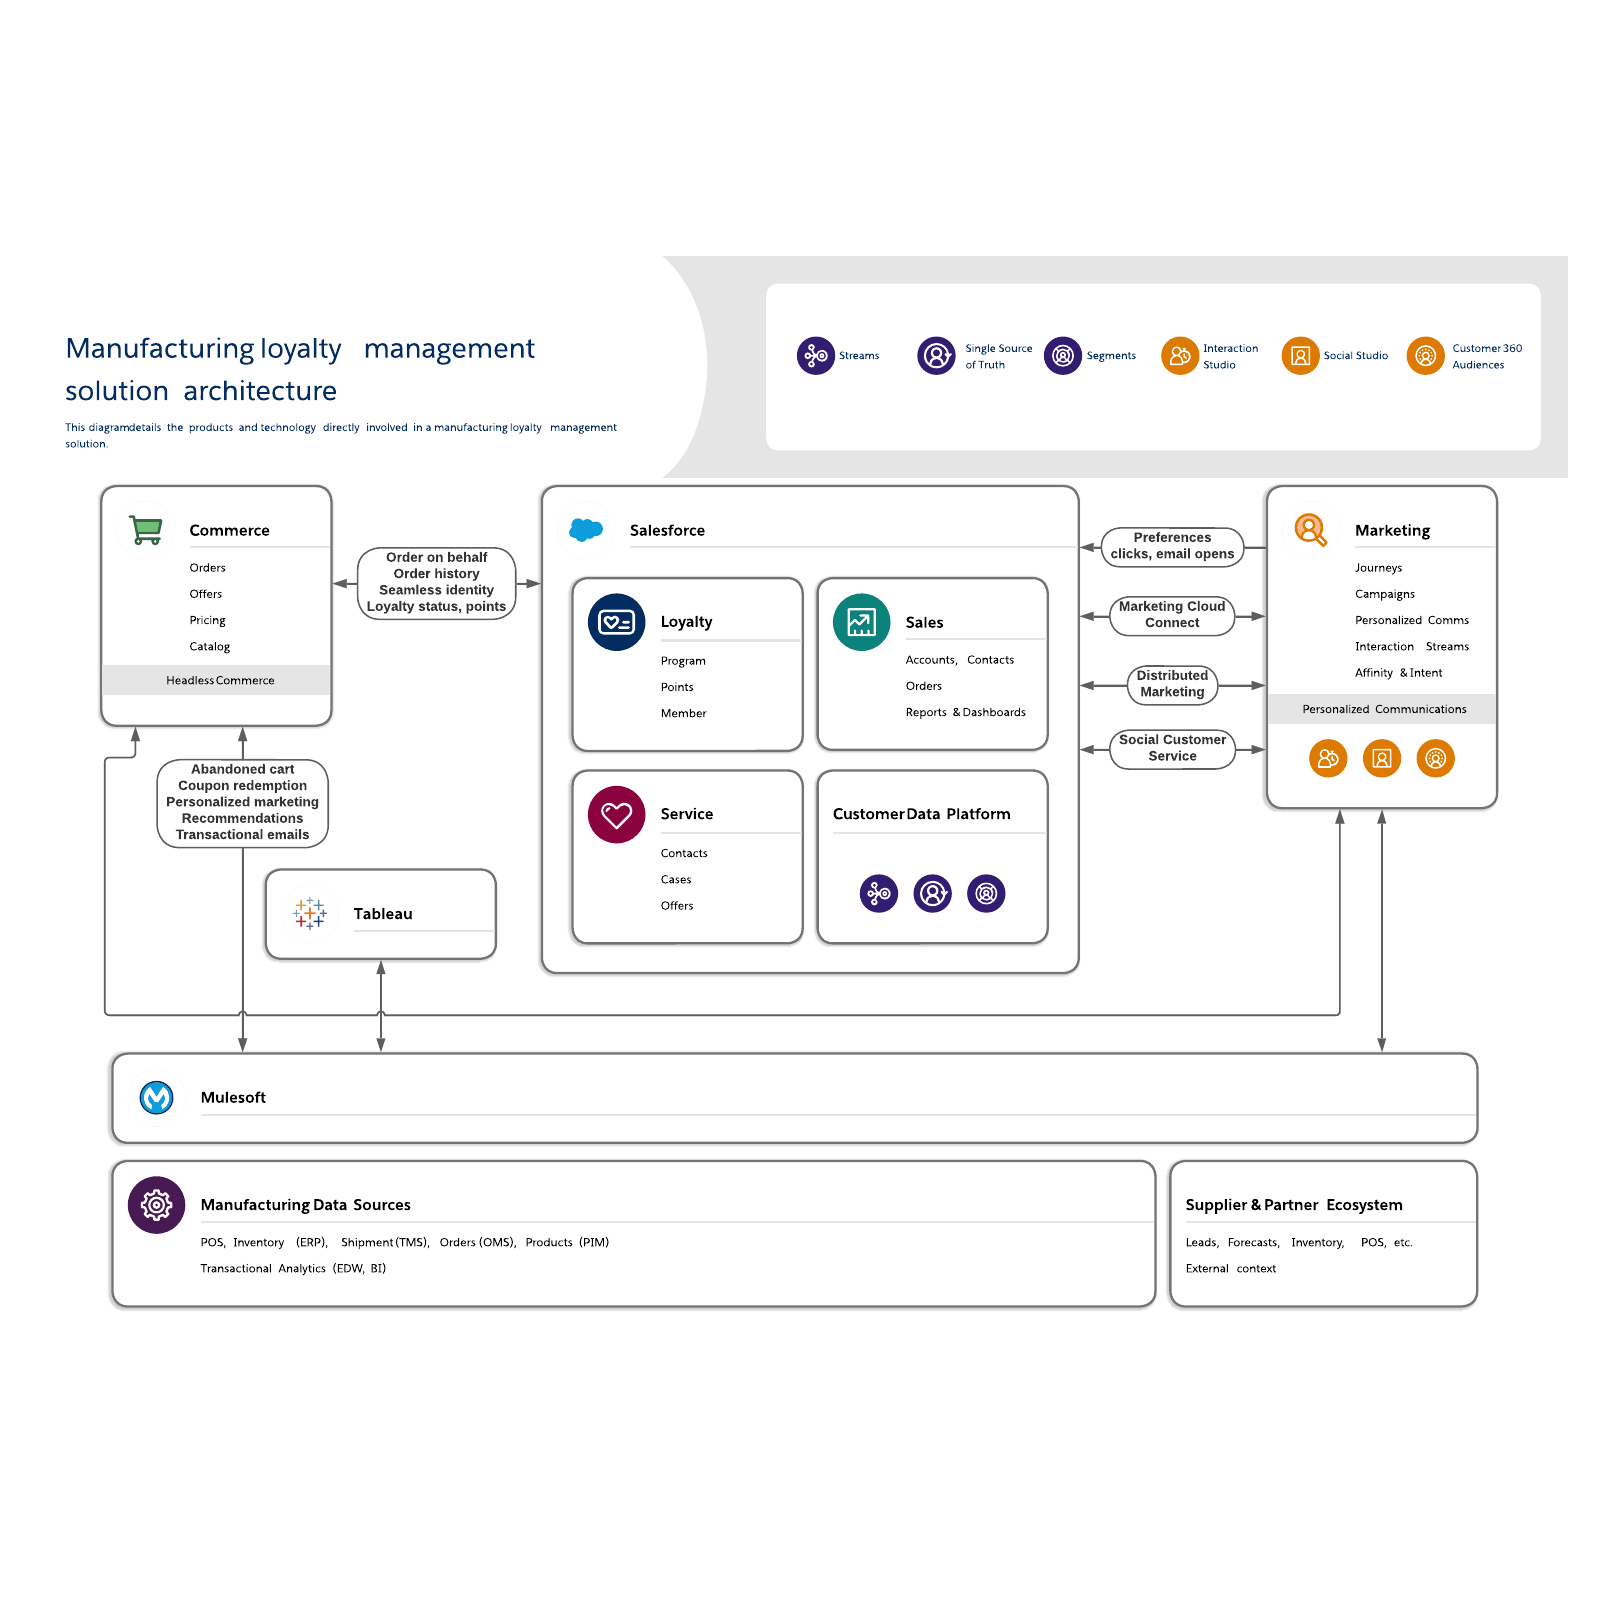 Manufacturing loyalty management solution architecture example